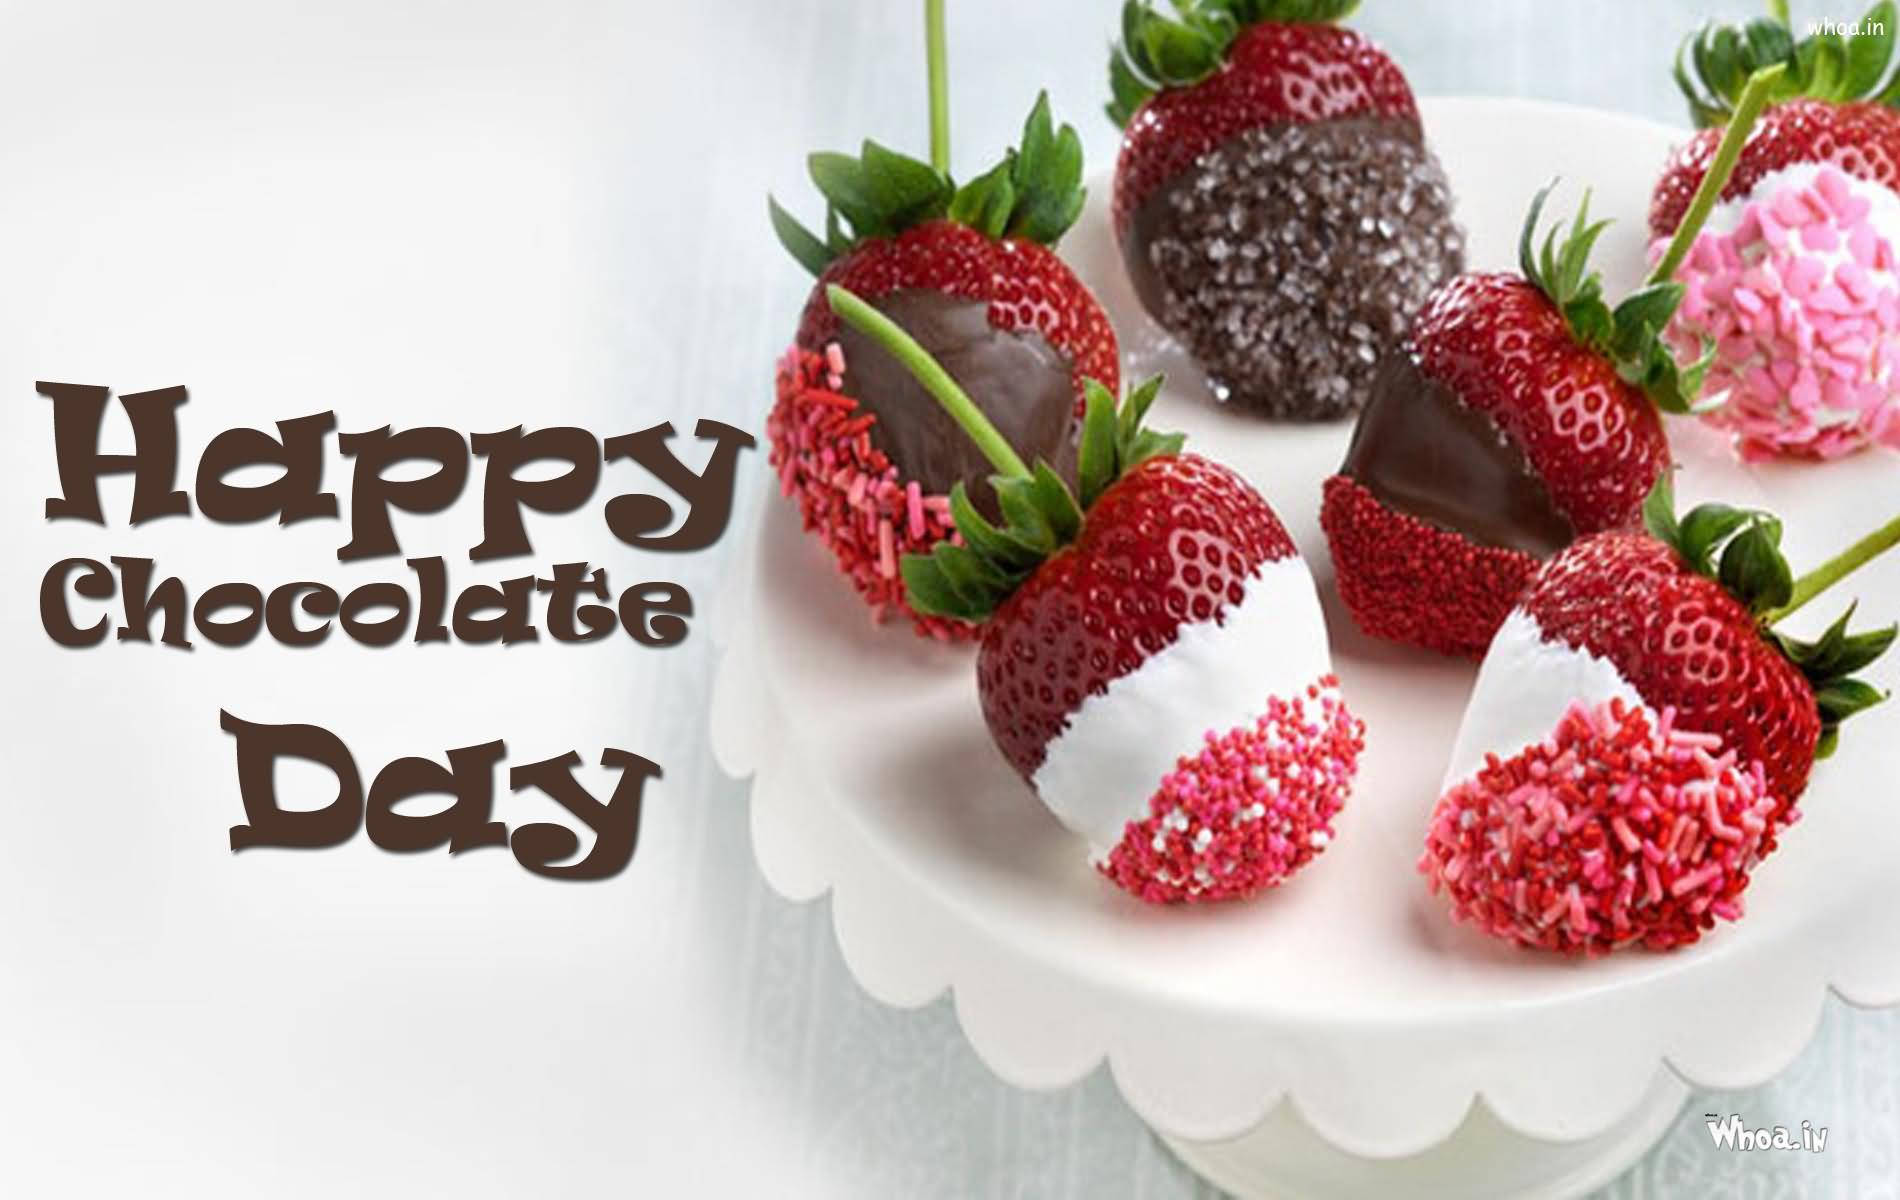 Celebrate The Sweetness Of Life On Chocolate Day With Freshly Dipped Strawberries. Background